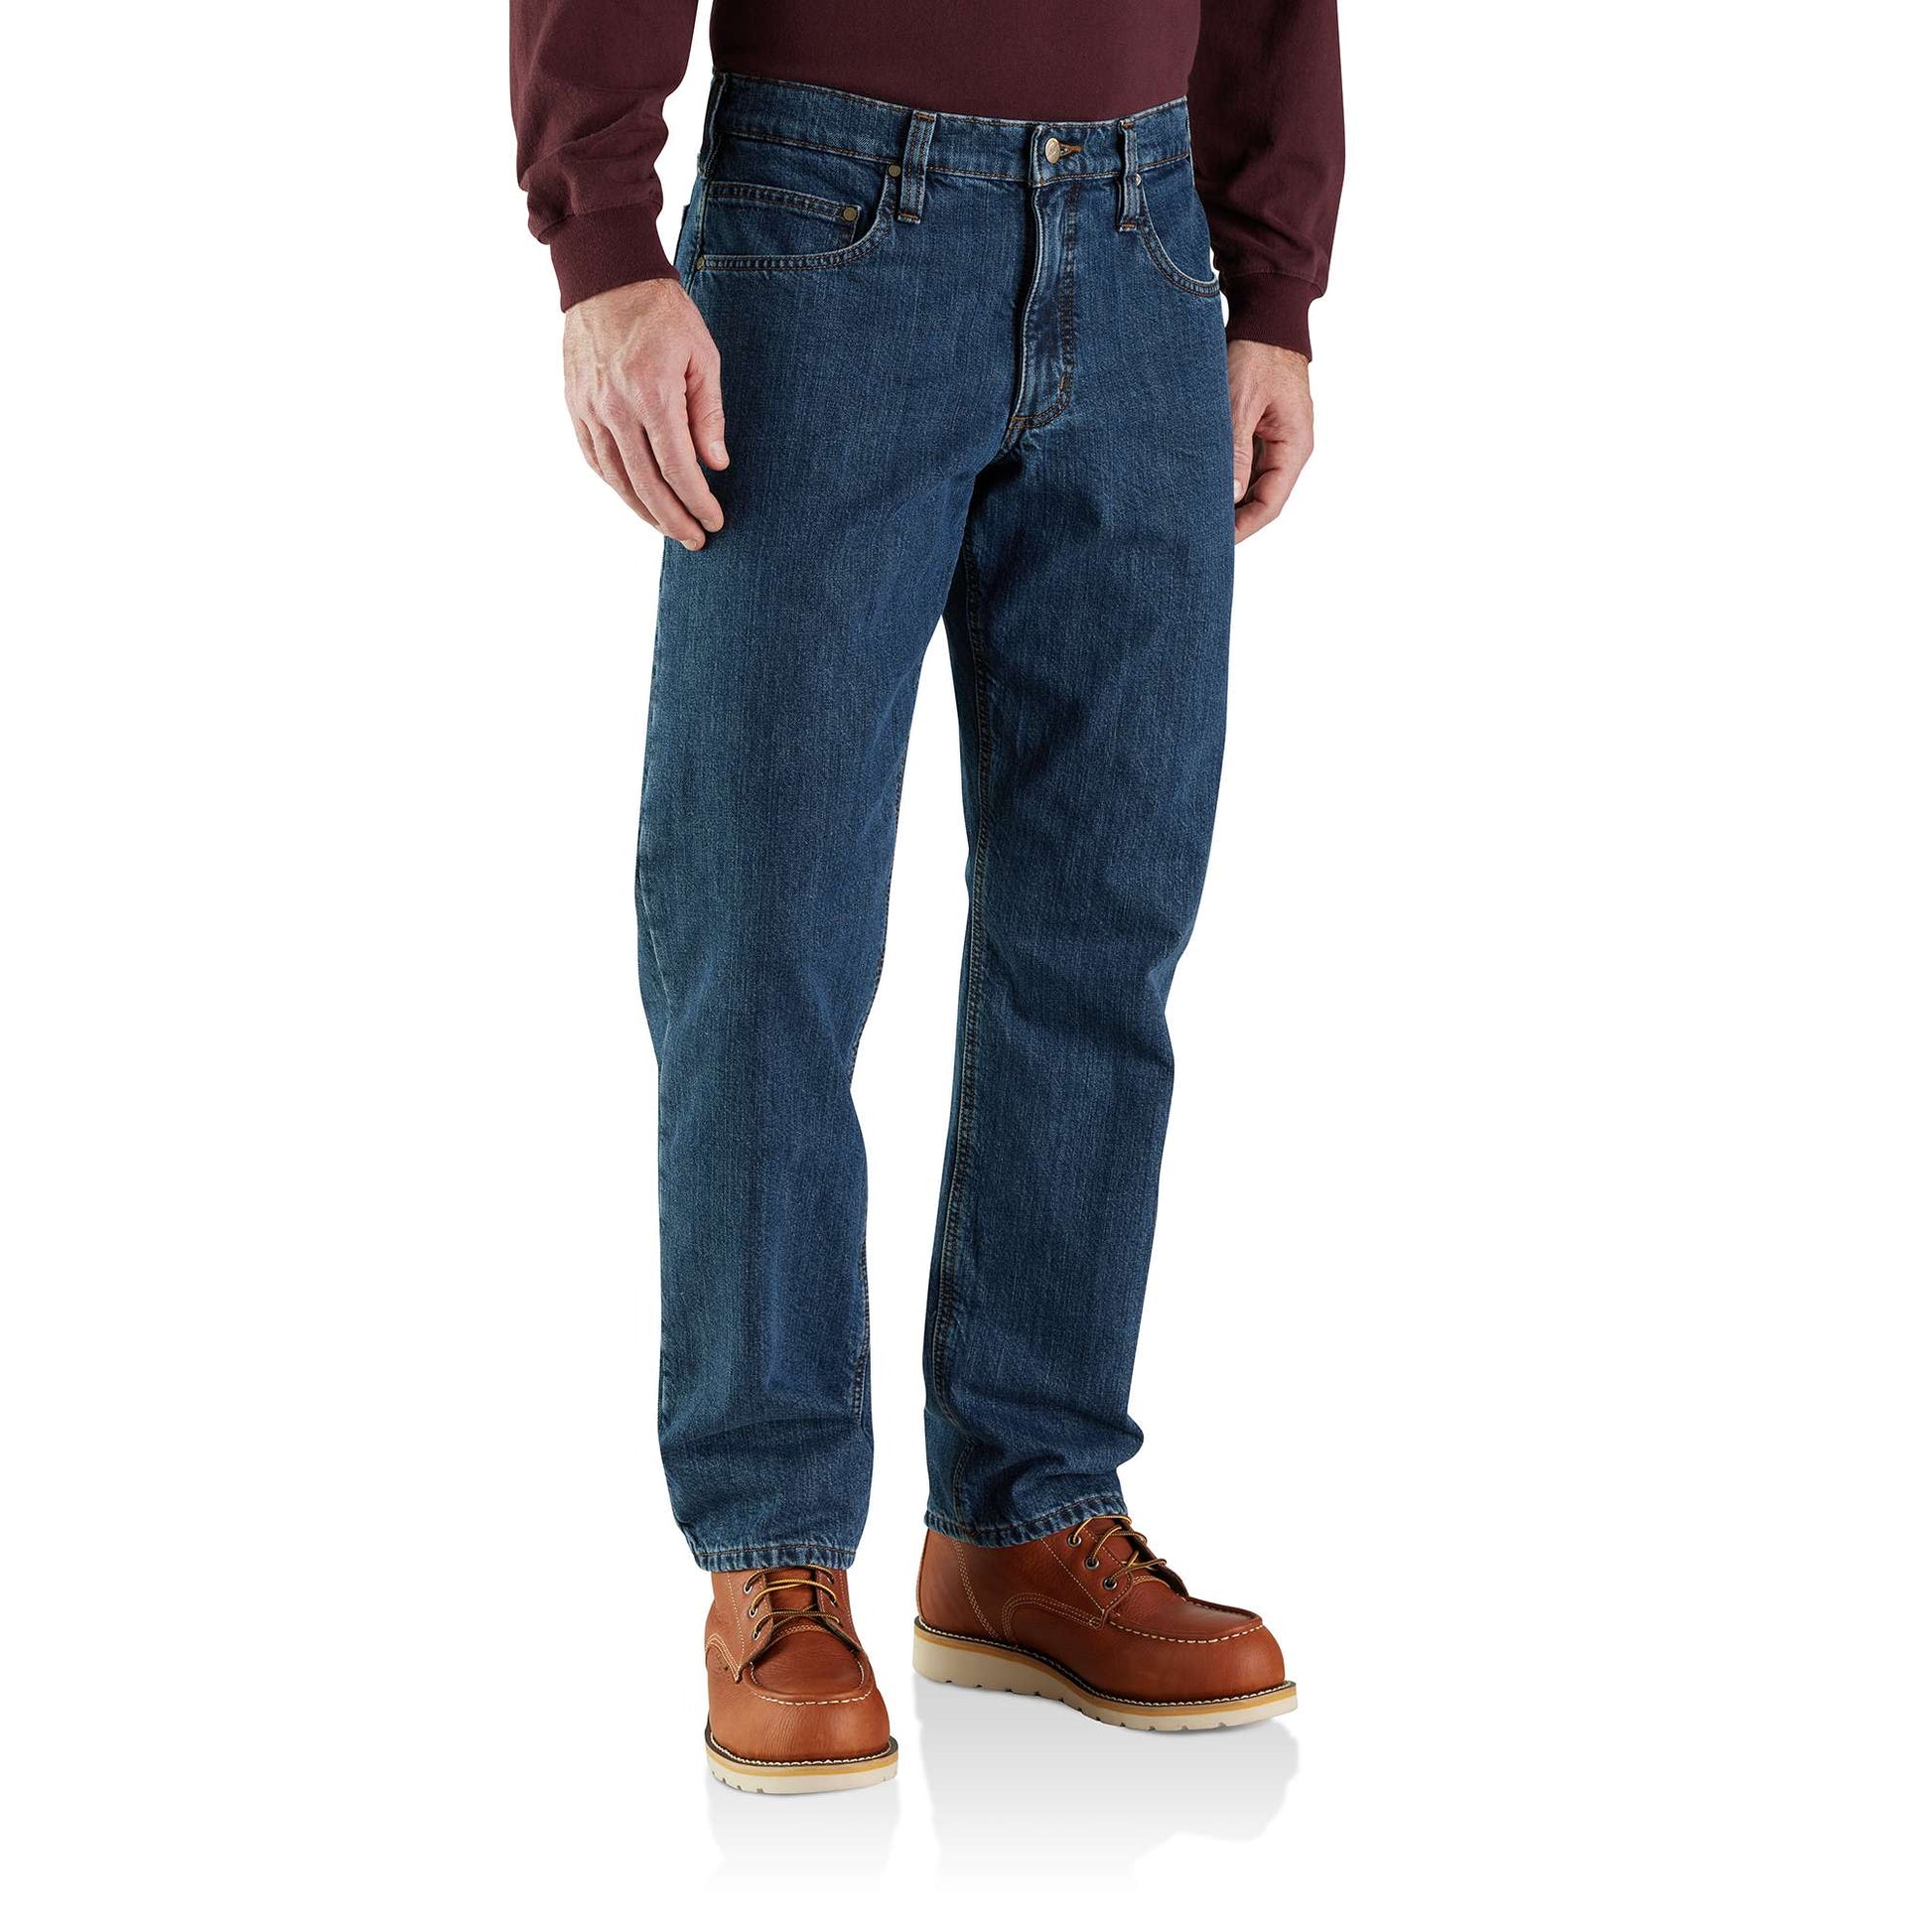 This item is unavailable -   Carhartt jeans, Vintage flannel shirt,  Mens workwear